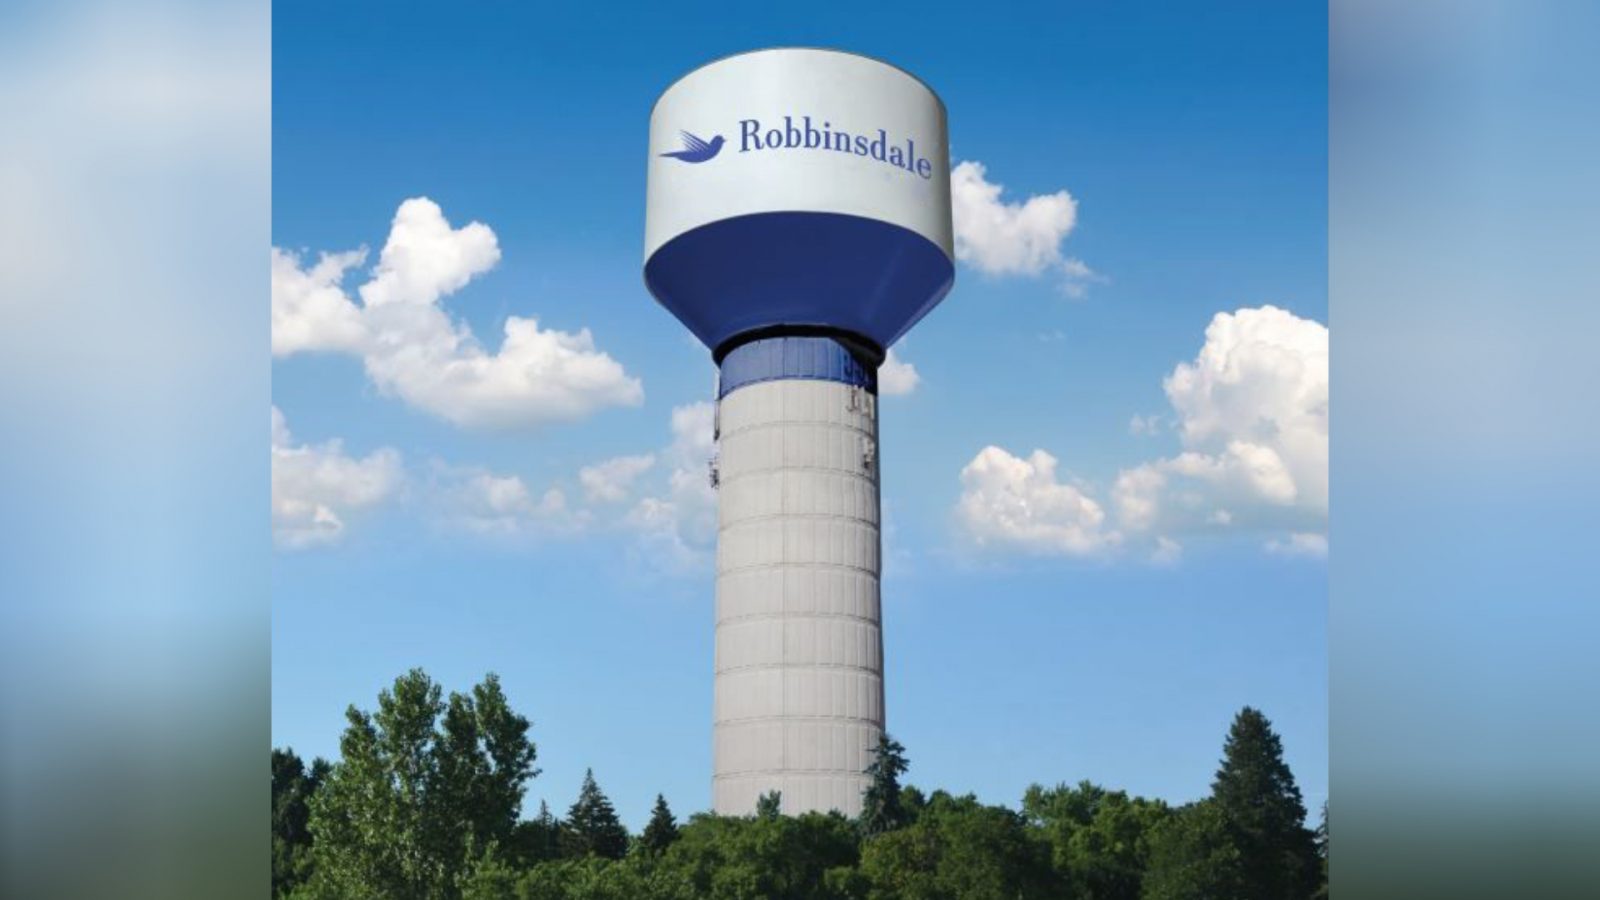 Robbinsdale Approves New Water Tower Design - CCX Media